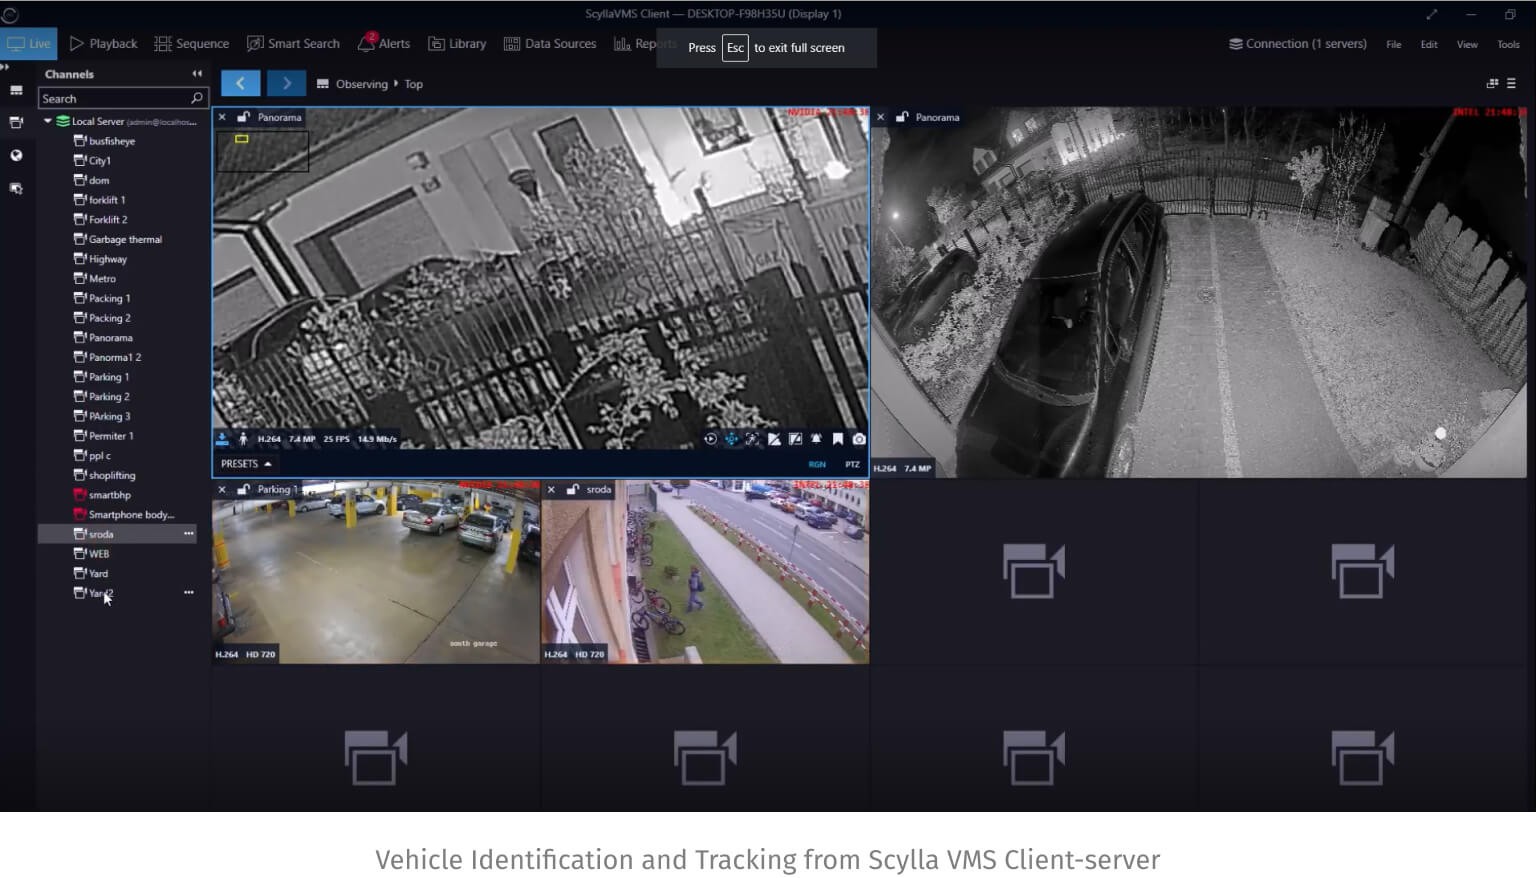 Vehicle Identification and Tracking from Scylla VMS Client-server